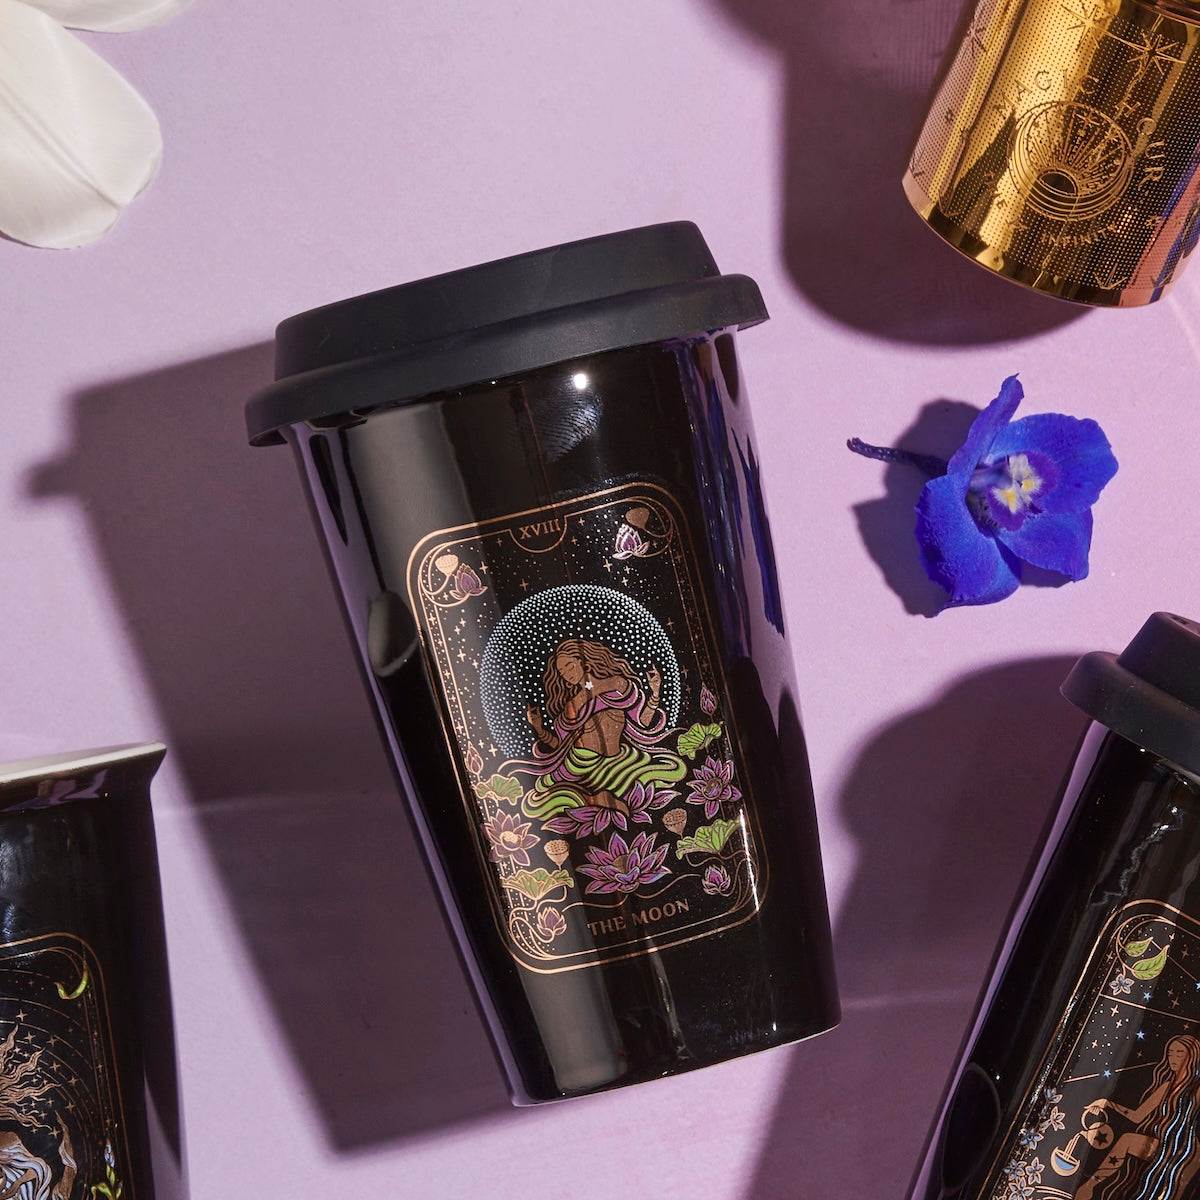 A black reusable cup with a mystical illustration featuring a meditative figure and lotus flowers, labeled &quot;The Queen of Cups - Tarot To Go!,&quot; is placed on a light pink surface. The lid is black, and nearby are another cup of Magic Hour Tea, a golden cylindrical object, a white flower petal, and a blue flower.